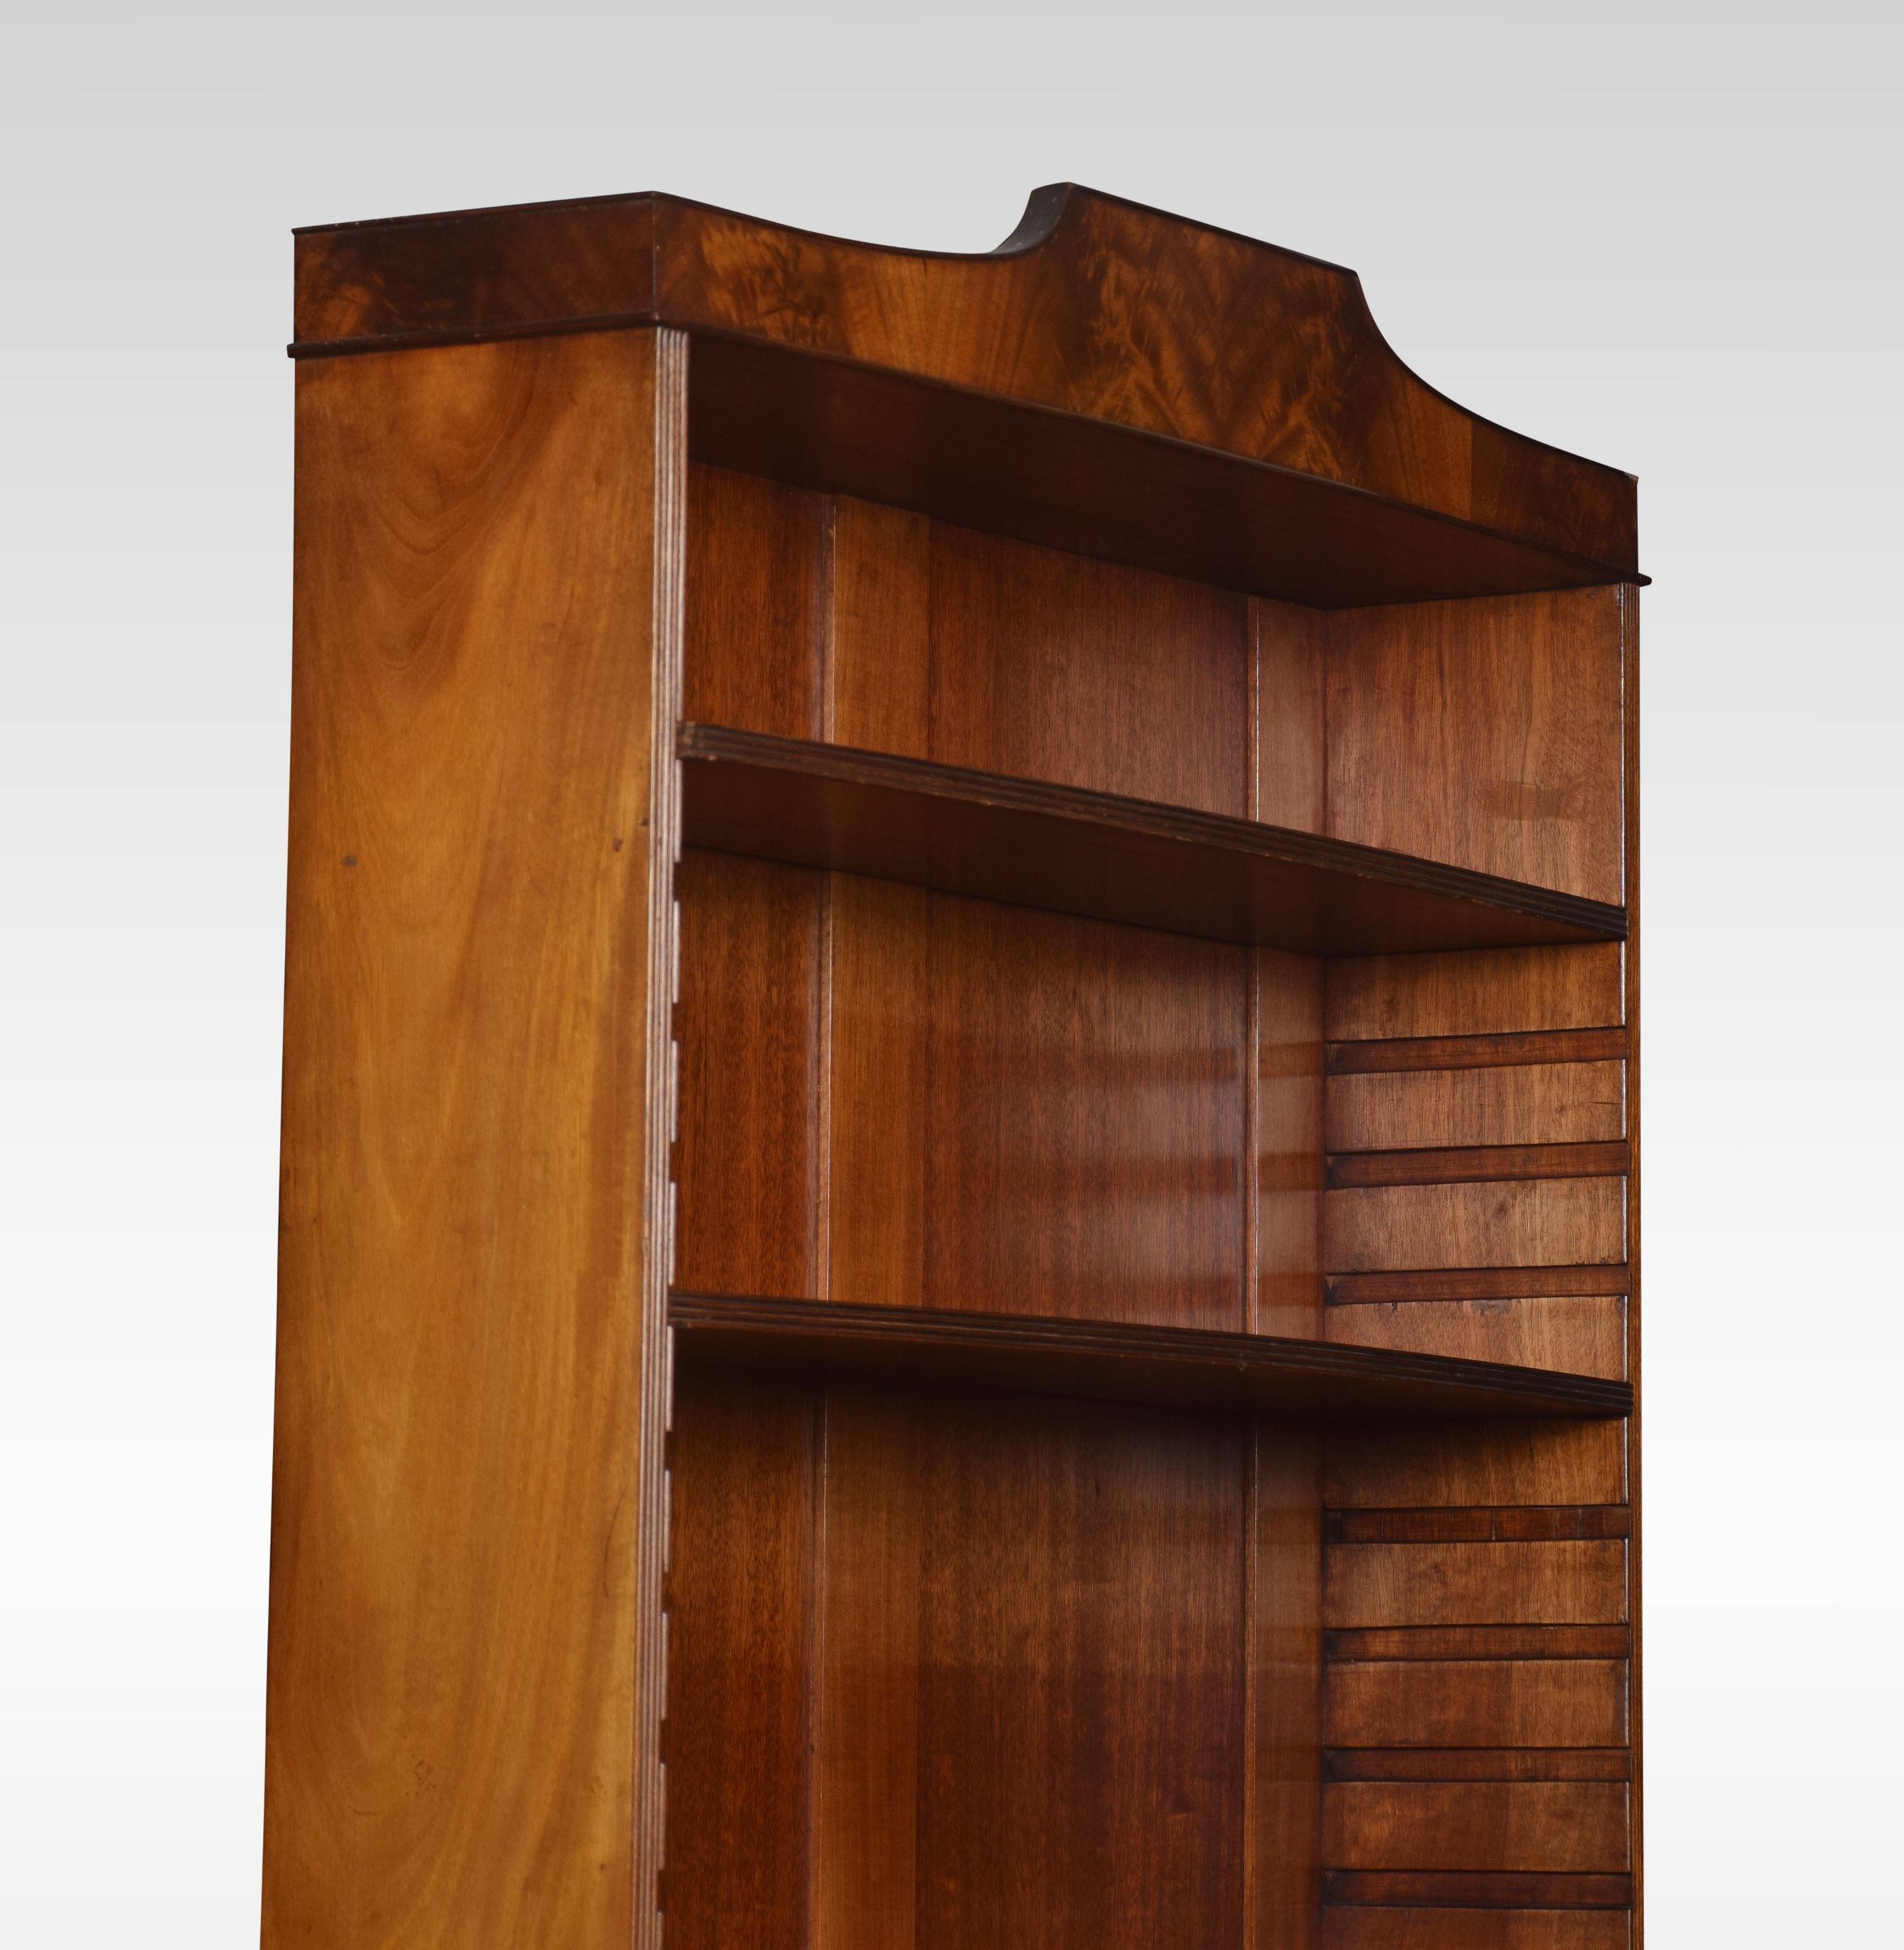 Regency style mahogany bookcase, The shaped cornice above four adjustable shelves. The base section fitted with a pair of paneled doors opening to reveal a fitted interior. All raised up on splayed feet.
Dimensions:
Height 79.5 inches
Width 34